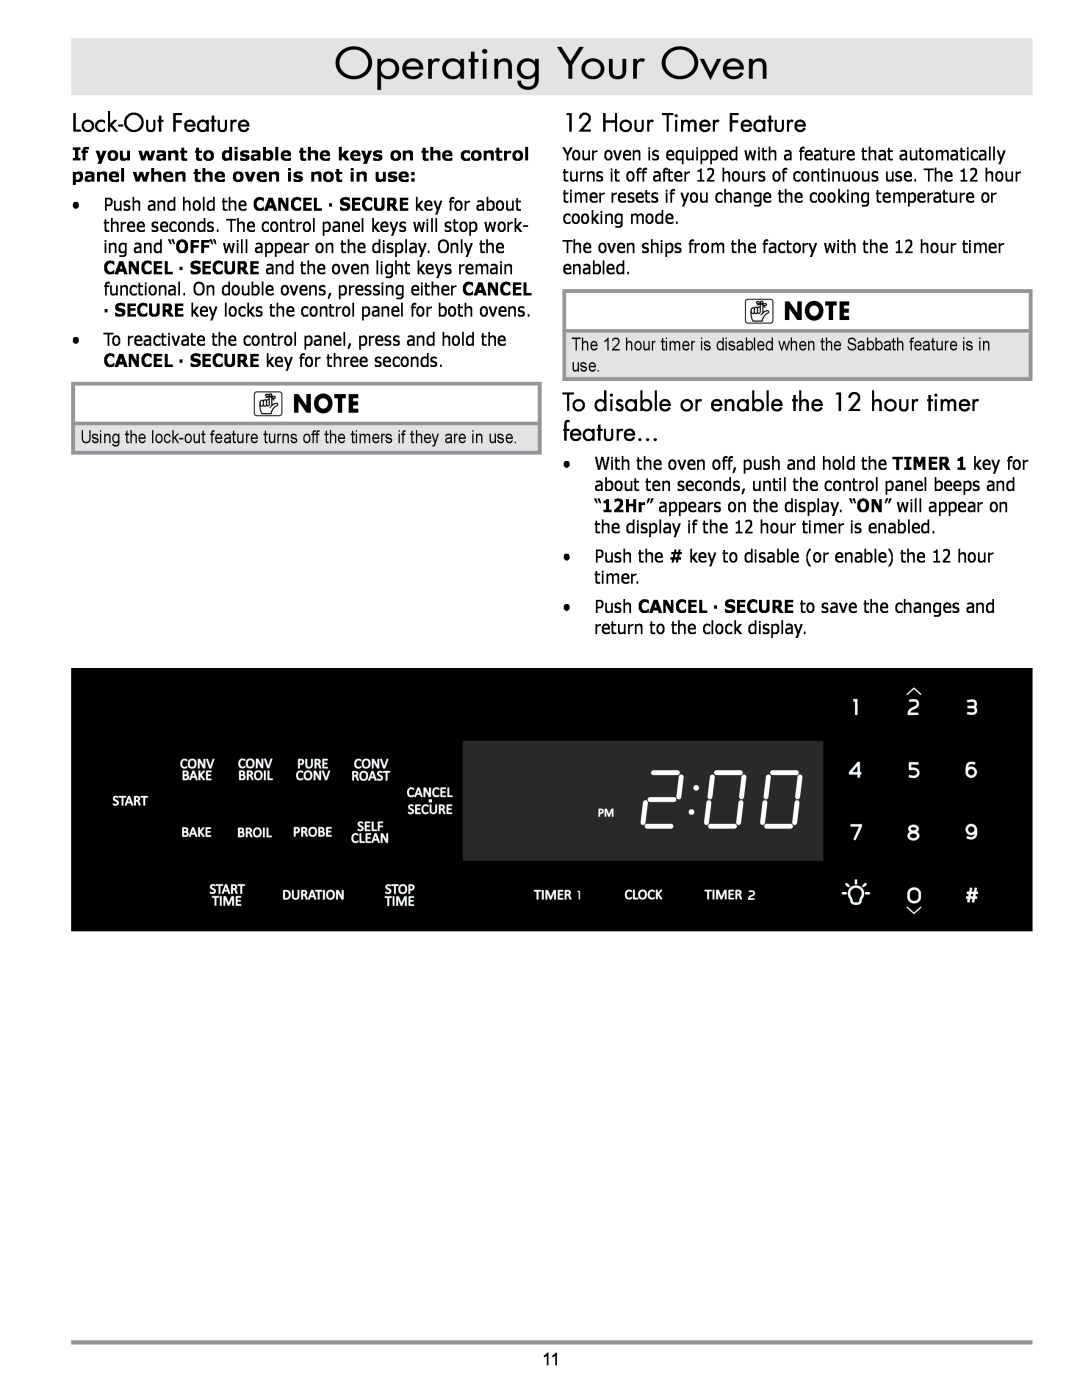 Sears EORD230 Lock-Out Feature, Hour Timer Feature, To disable or enable the 12 hour timer feature, Operating Your Oven 